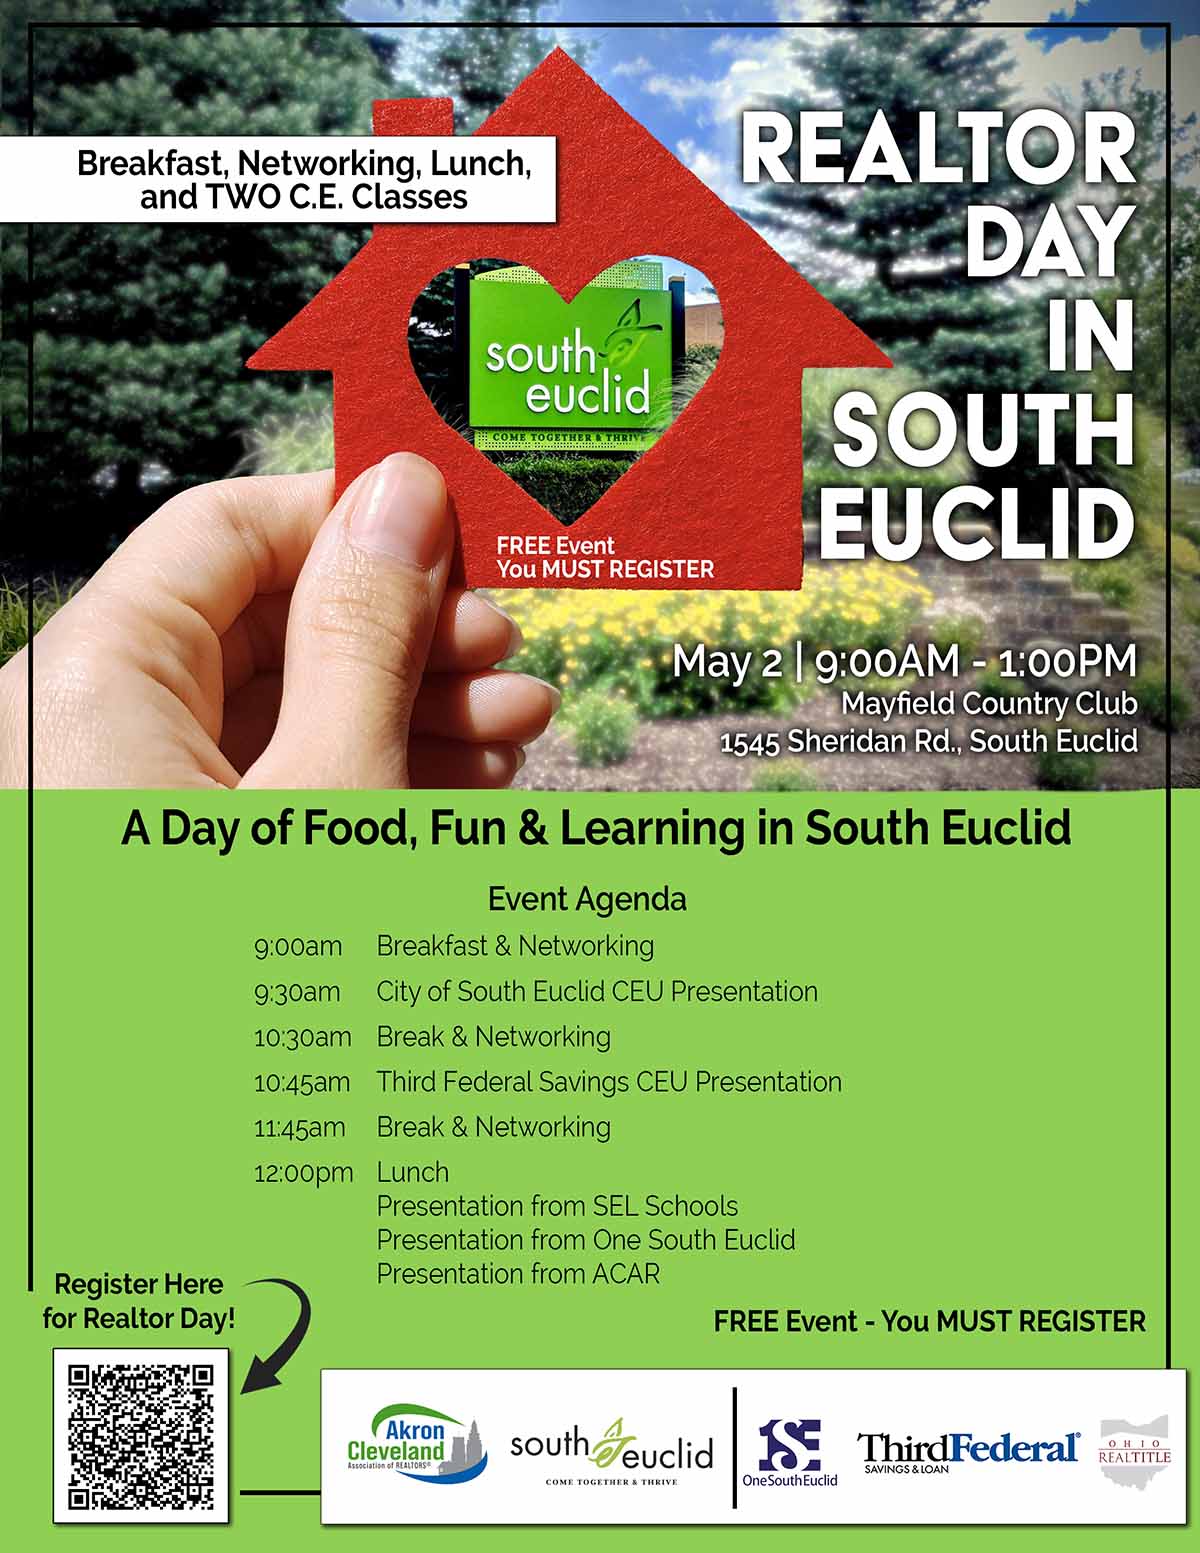 Featured image for “REALTOR Day in South Euclid”